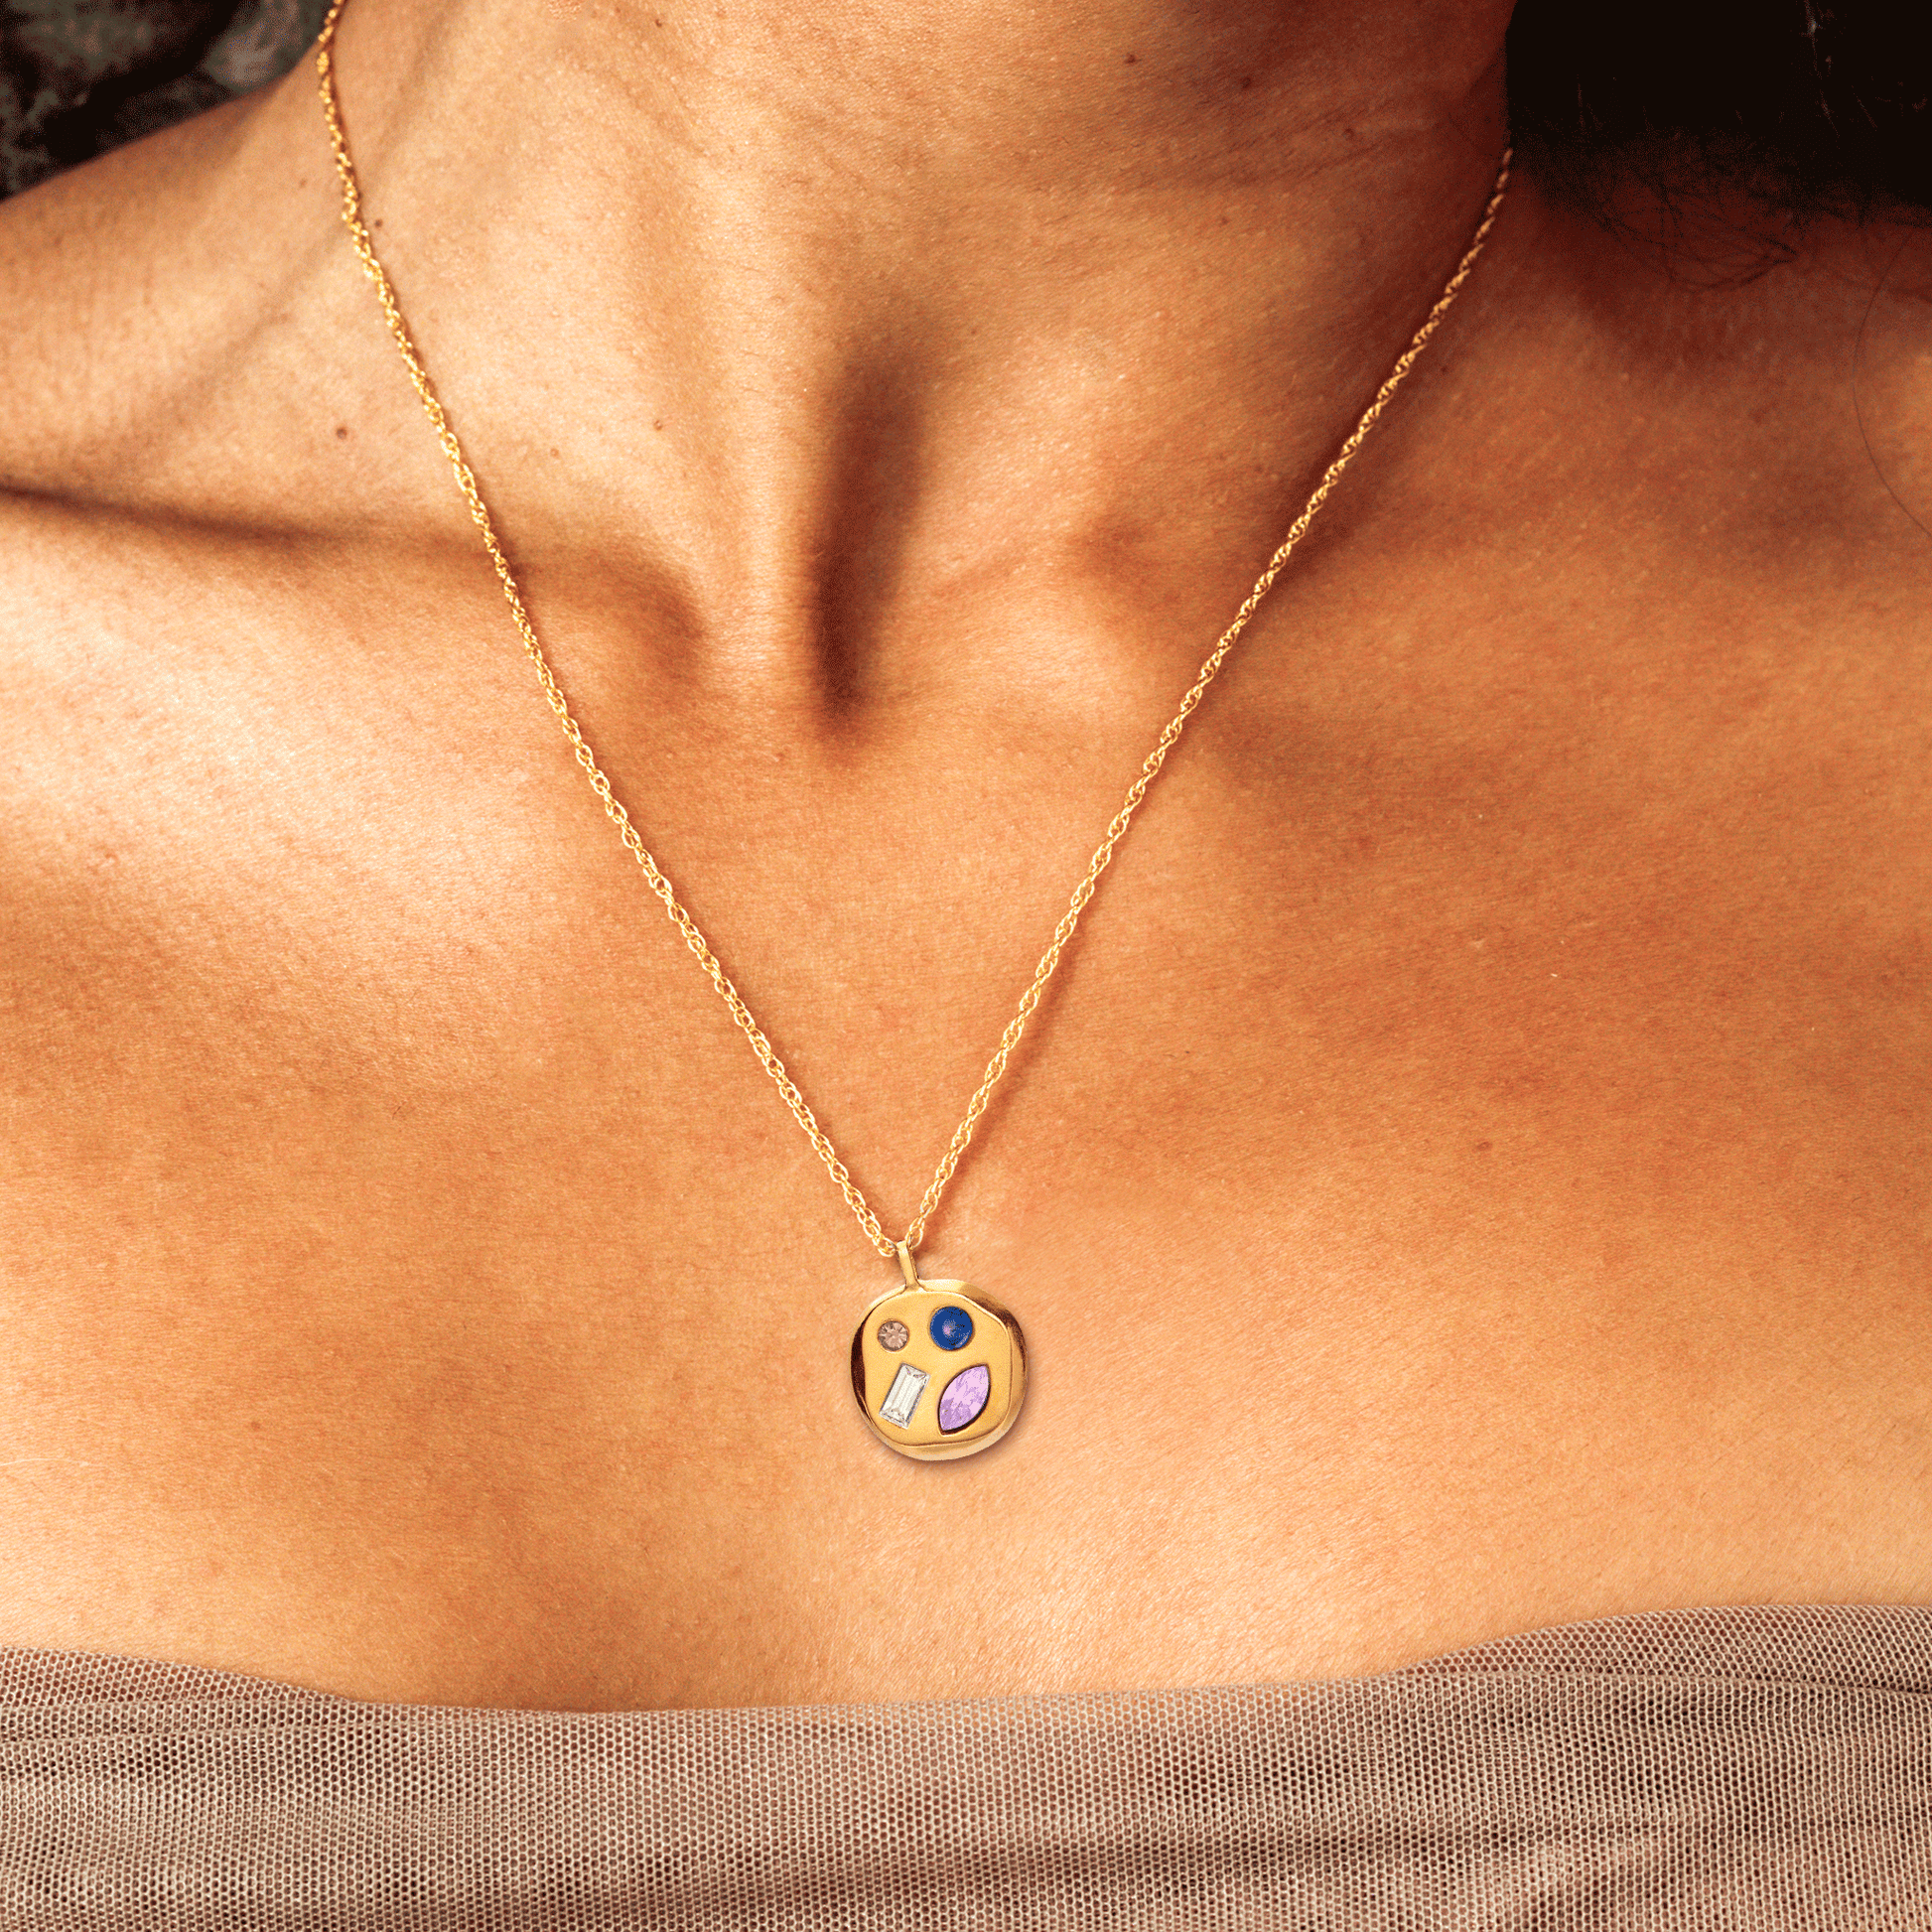 Person wearing The June Seventh Pendant